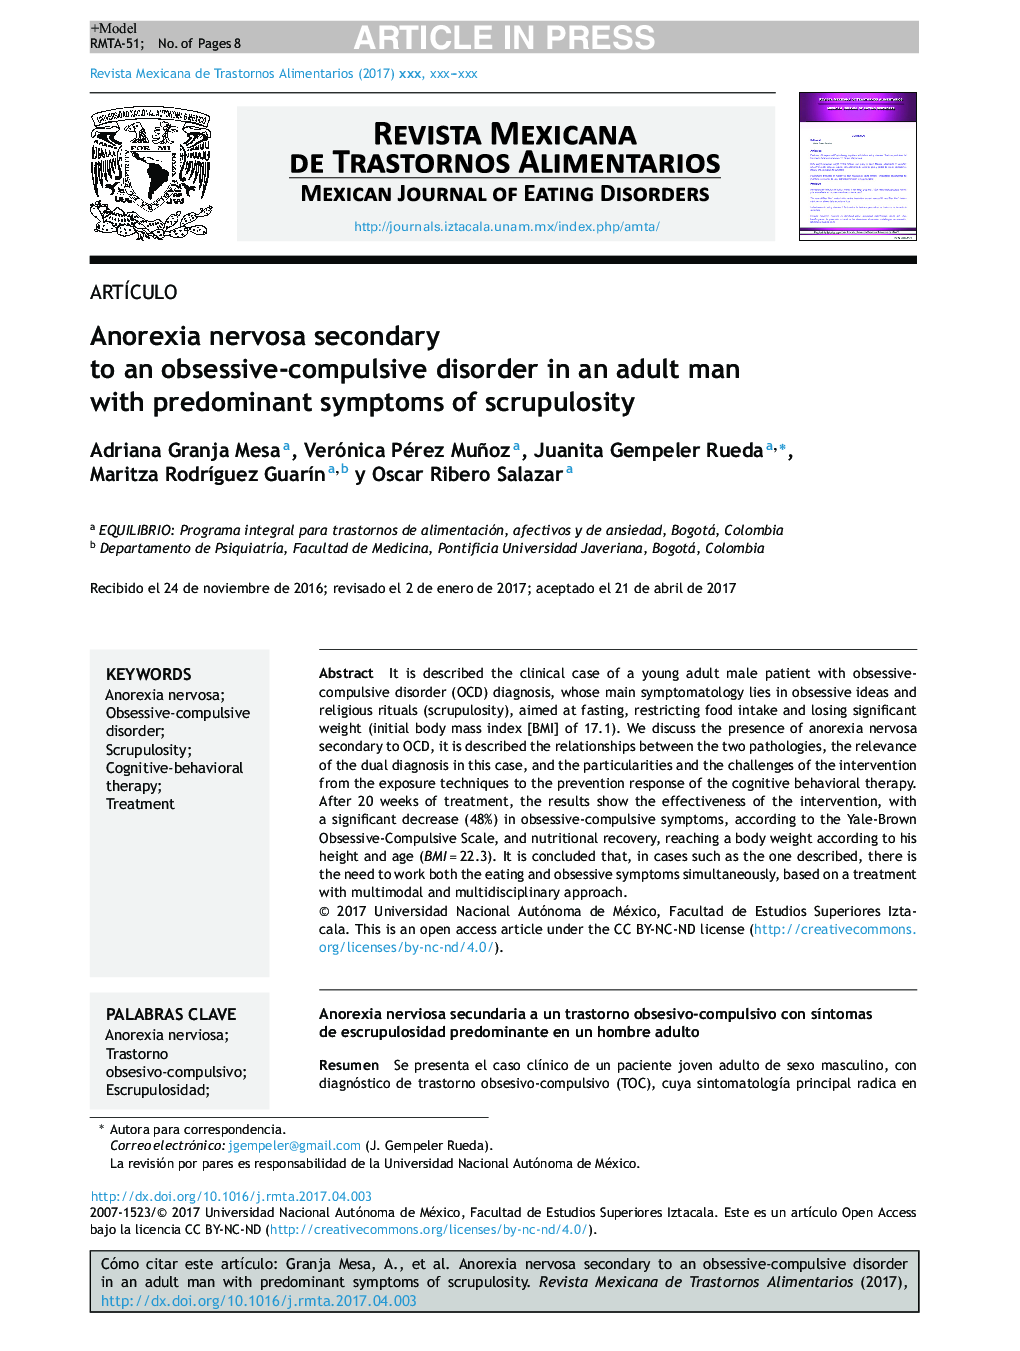 Anorexia nervosa secondary to an obsessive-compulsive disorder in an adult man with predominant symptoms of scrupulosity